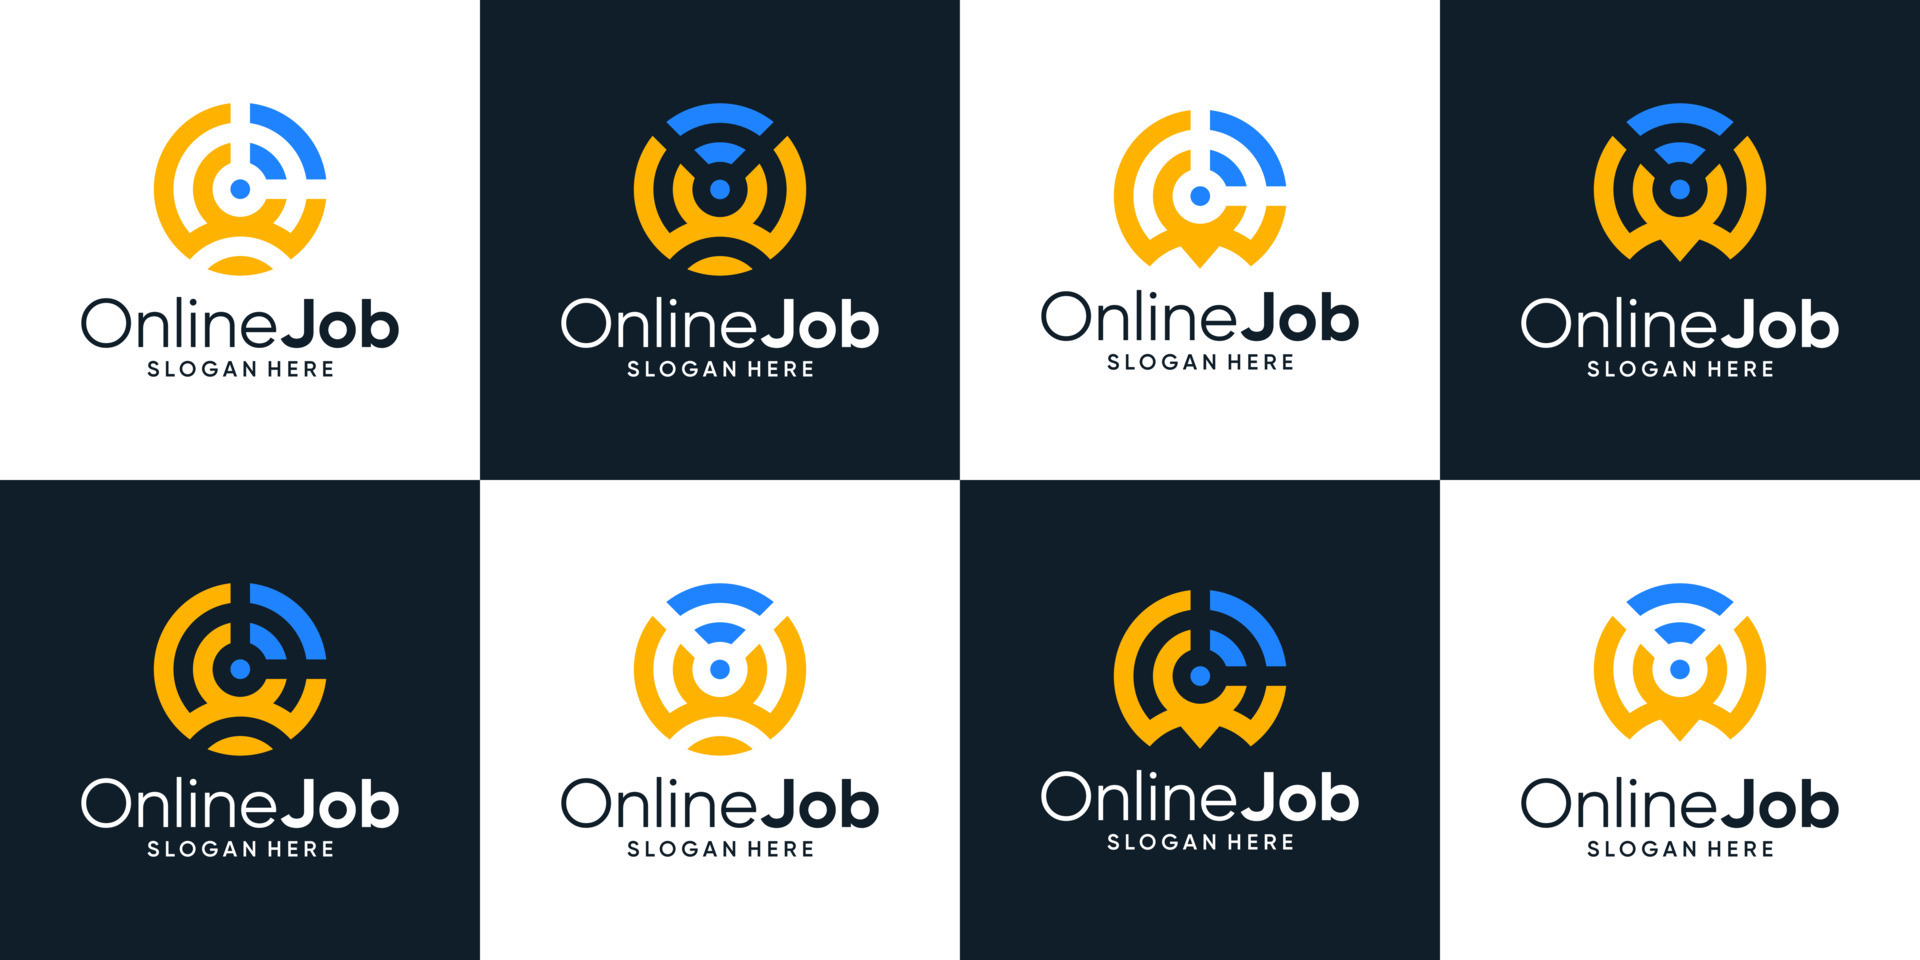 Online Jobs For Graphic Designers